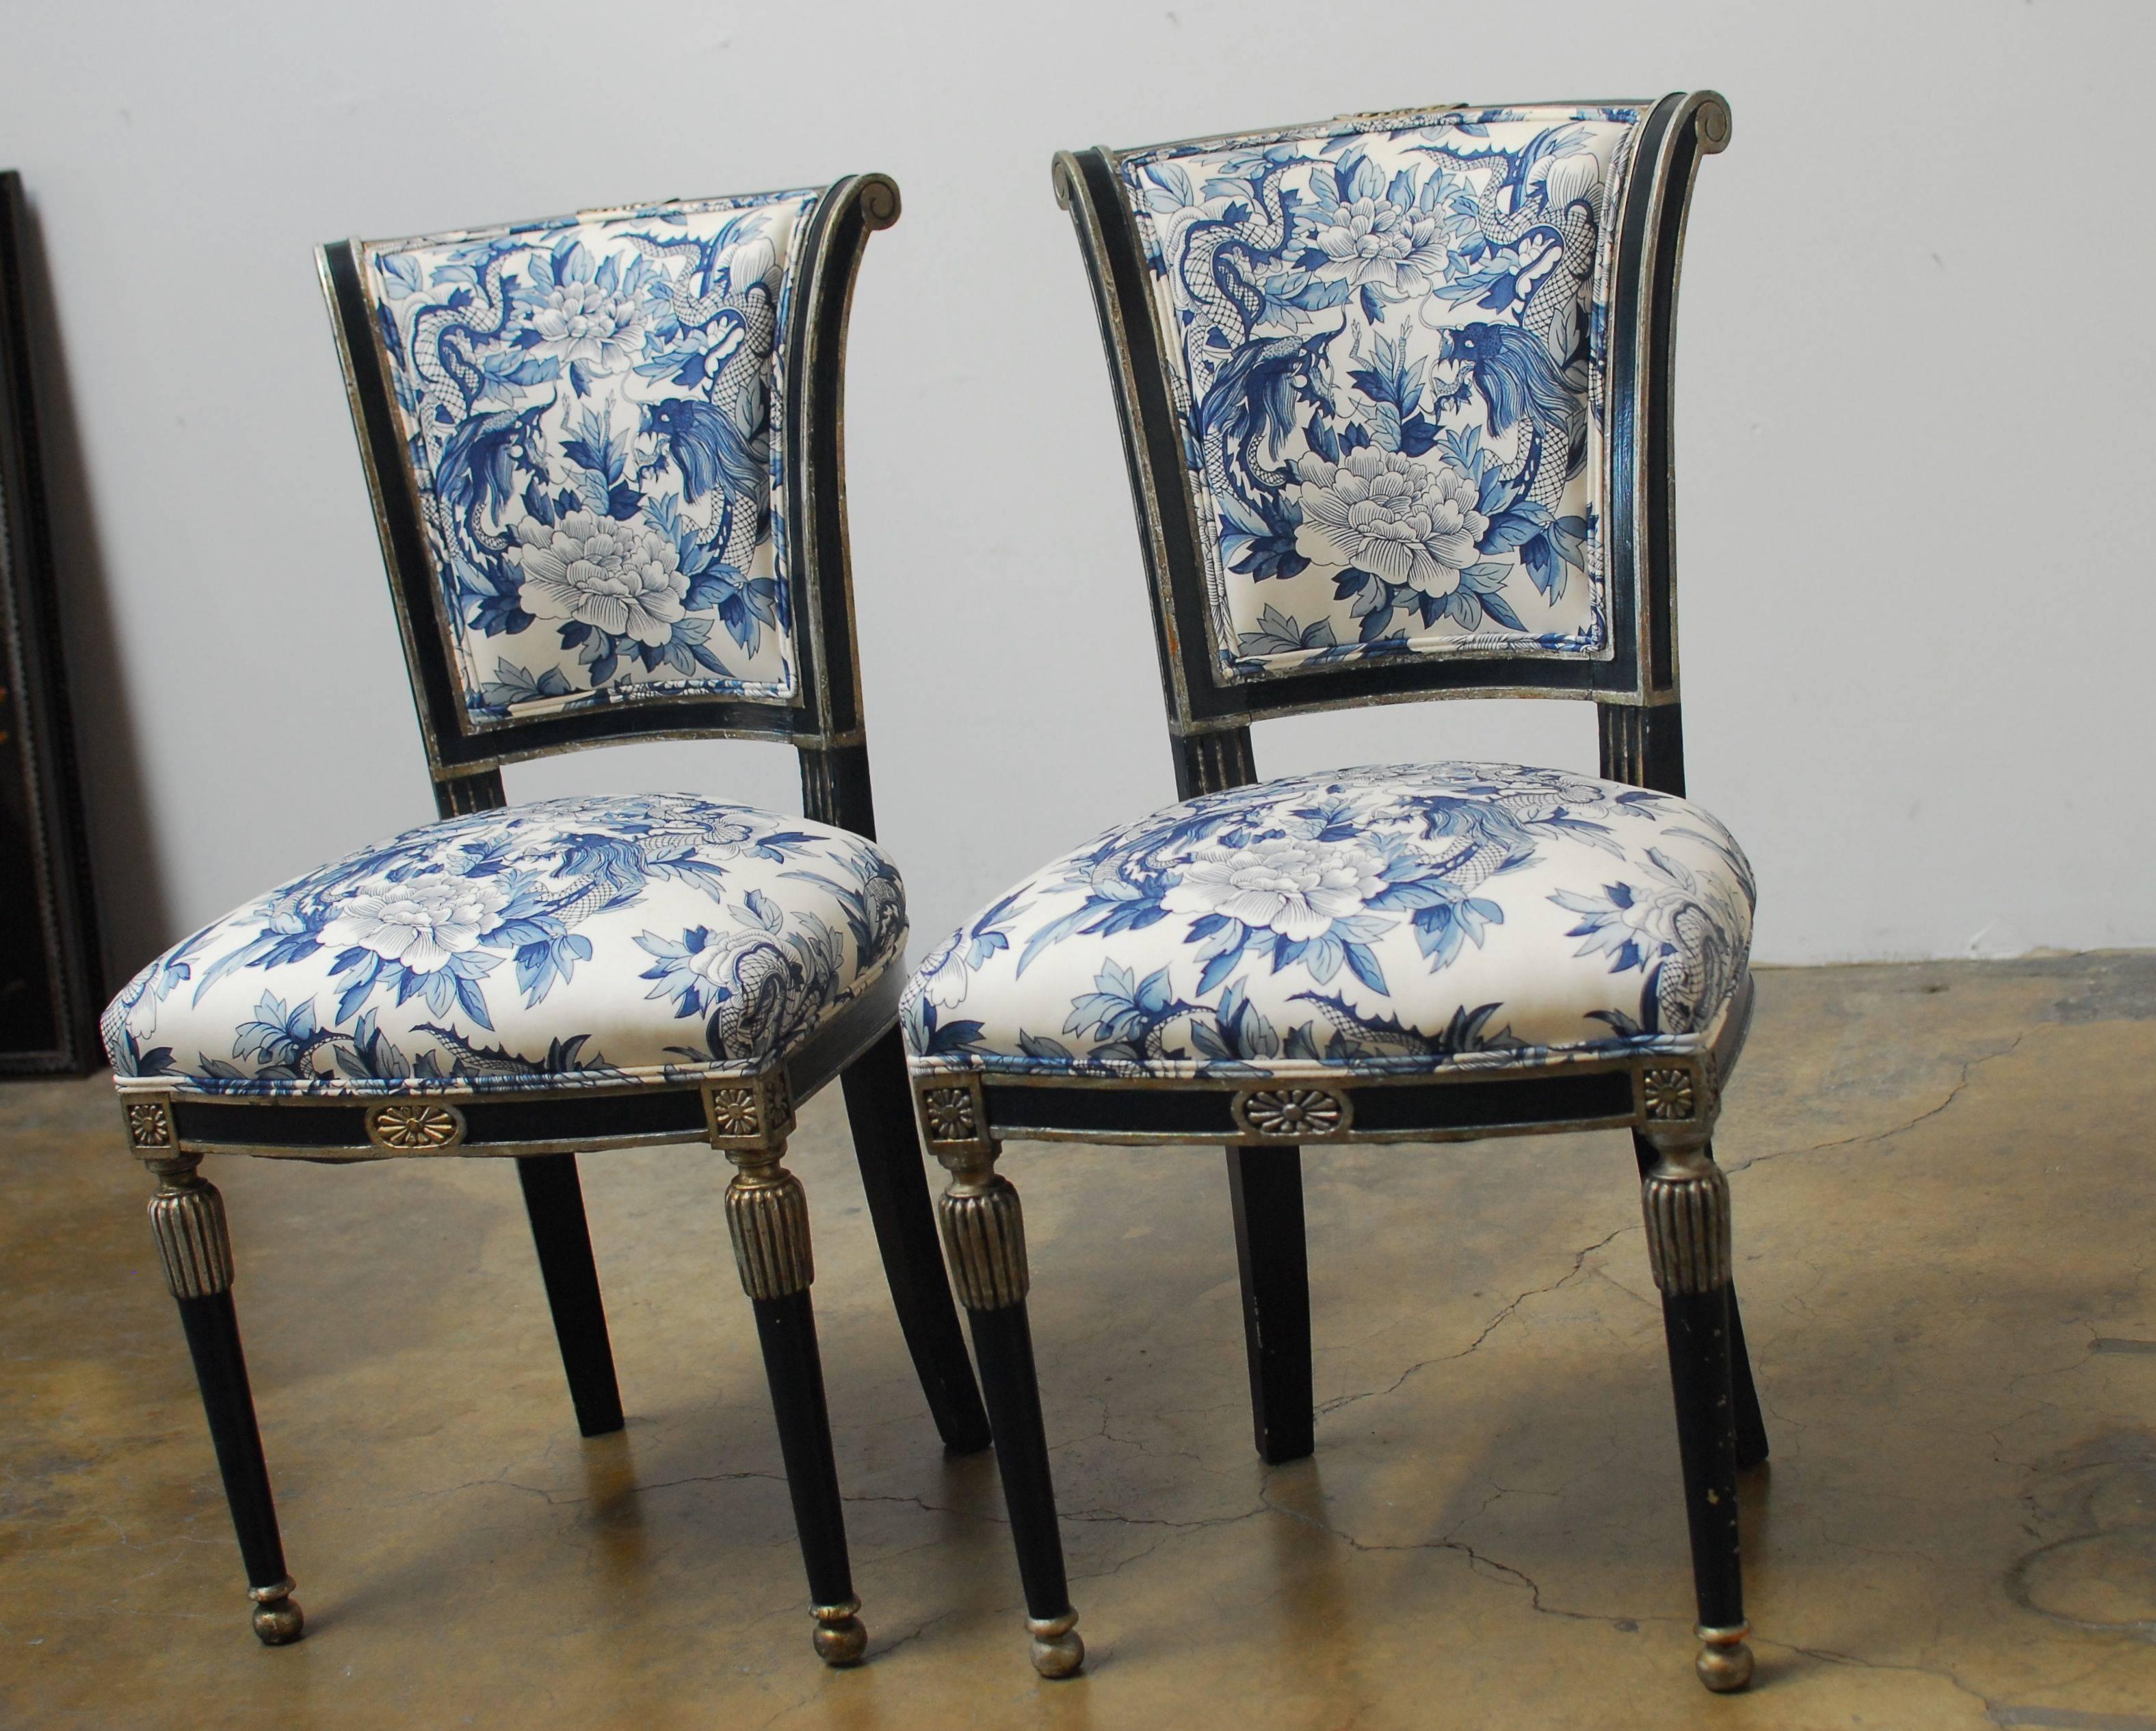 French Directoire Style Chairs with Chinoiserie Dragon Upholstery 3